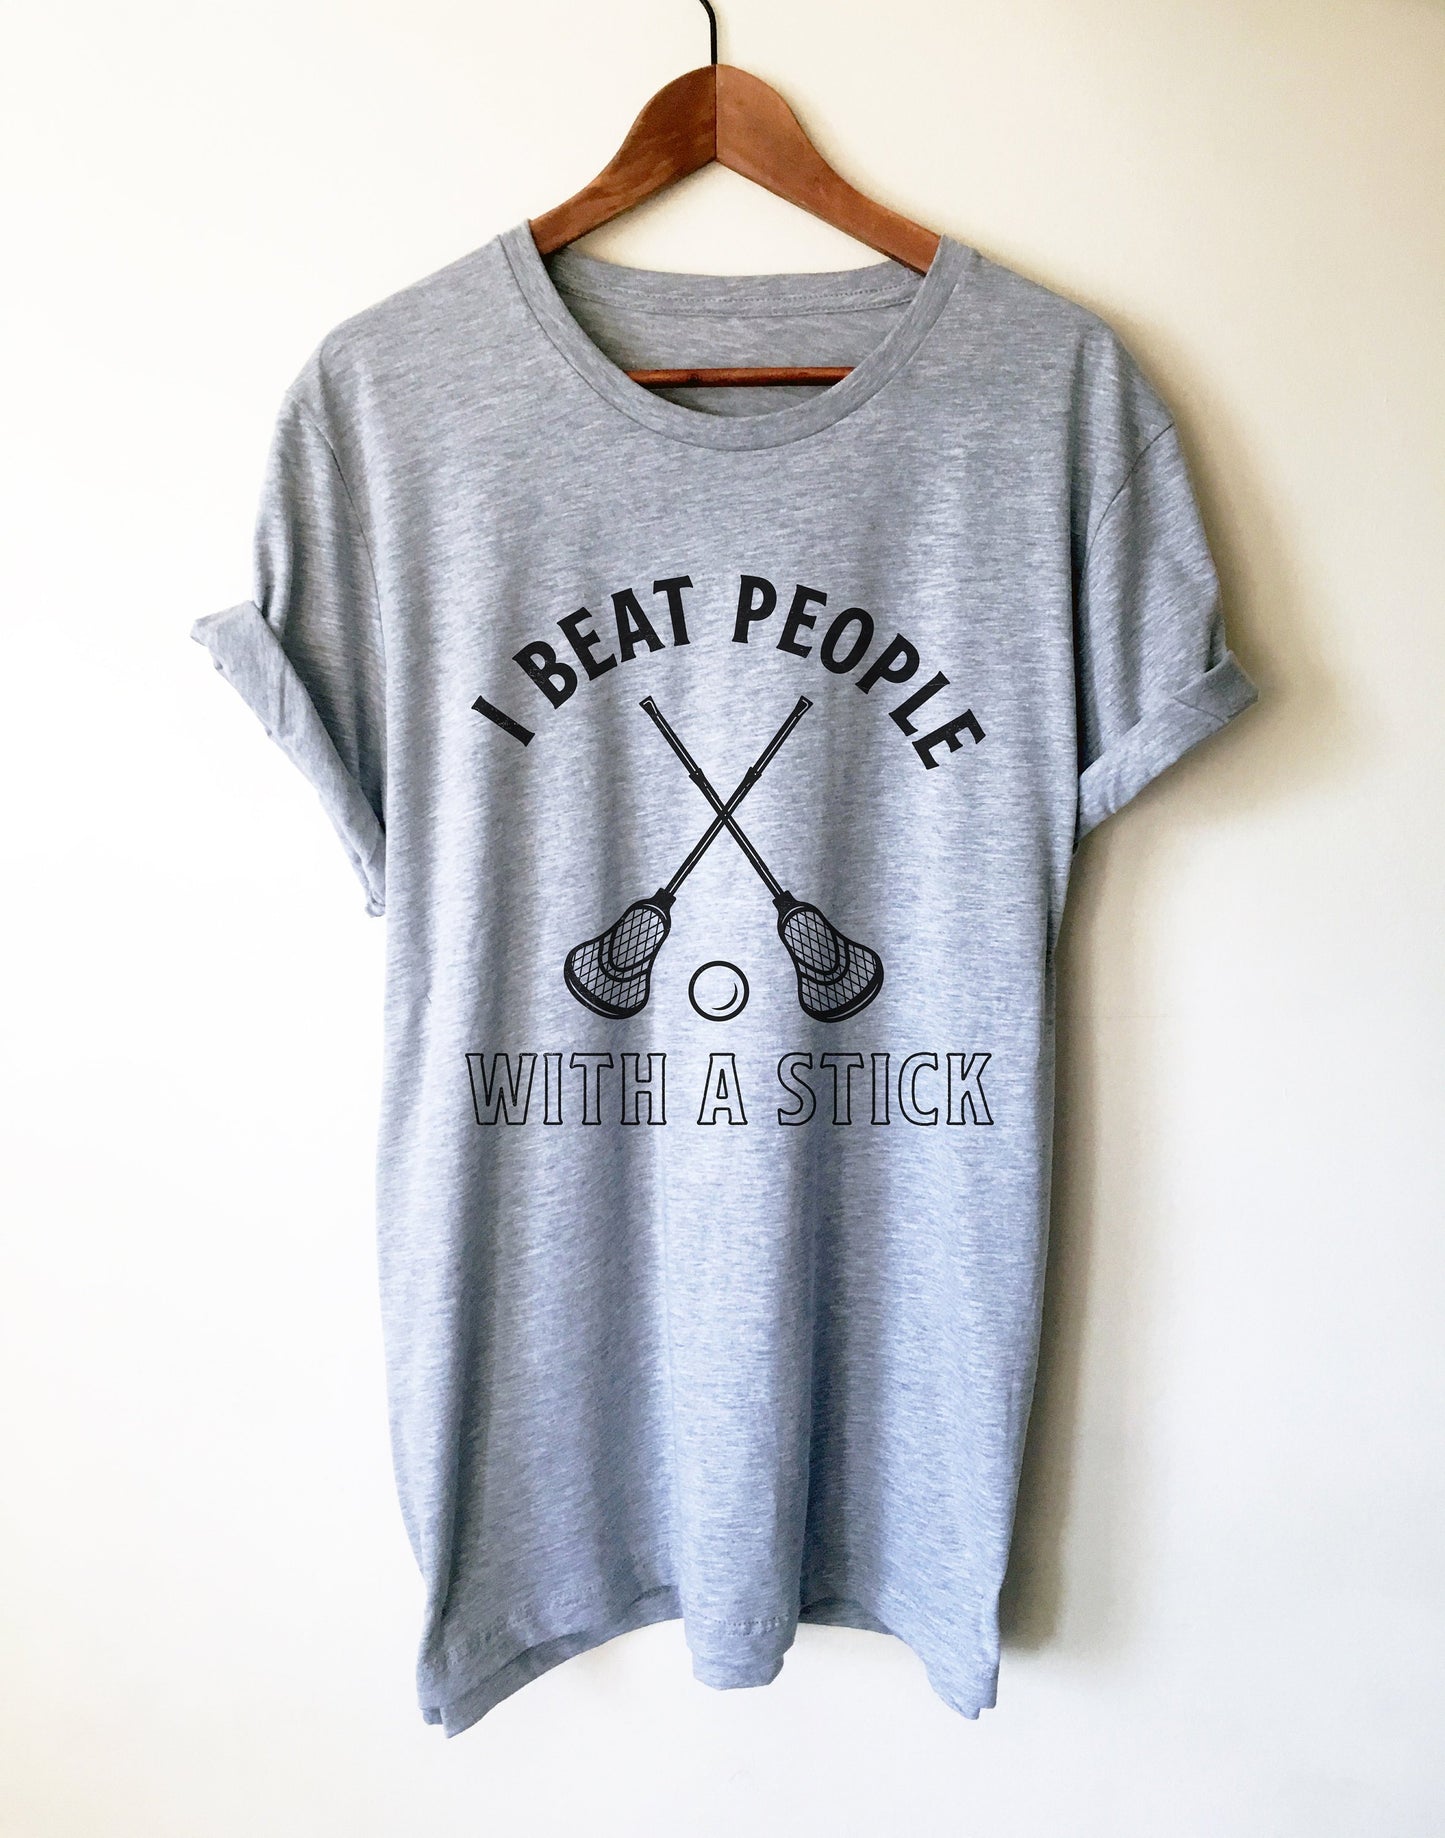 I Beat People With A Stick Unisex Shirt - Lacrosse Shirt, Lacrosse Gift, Lacrosse Player, Lacrosse Coach, Lacrosse Team, Sports Shirt